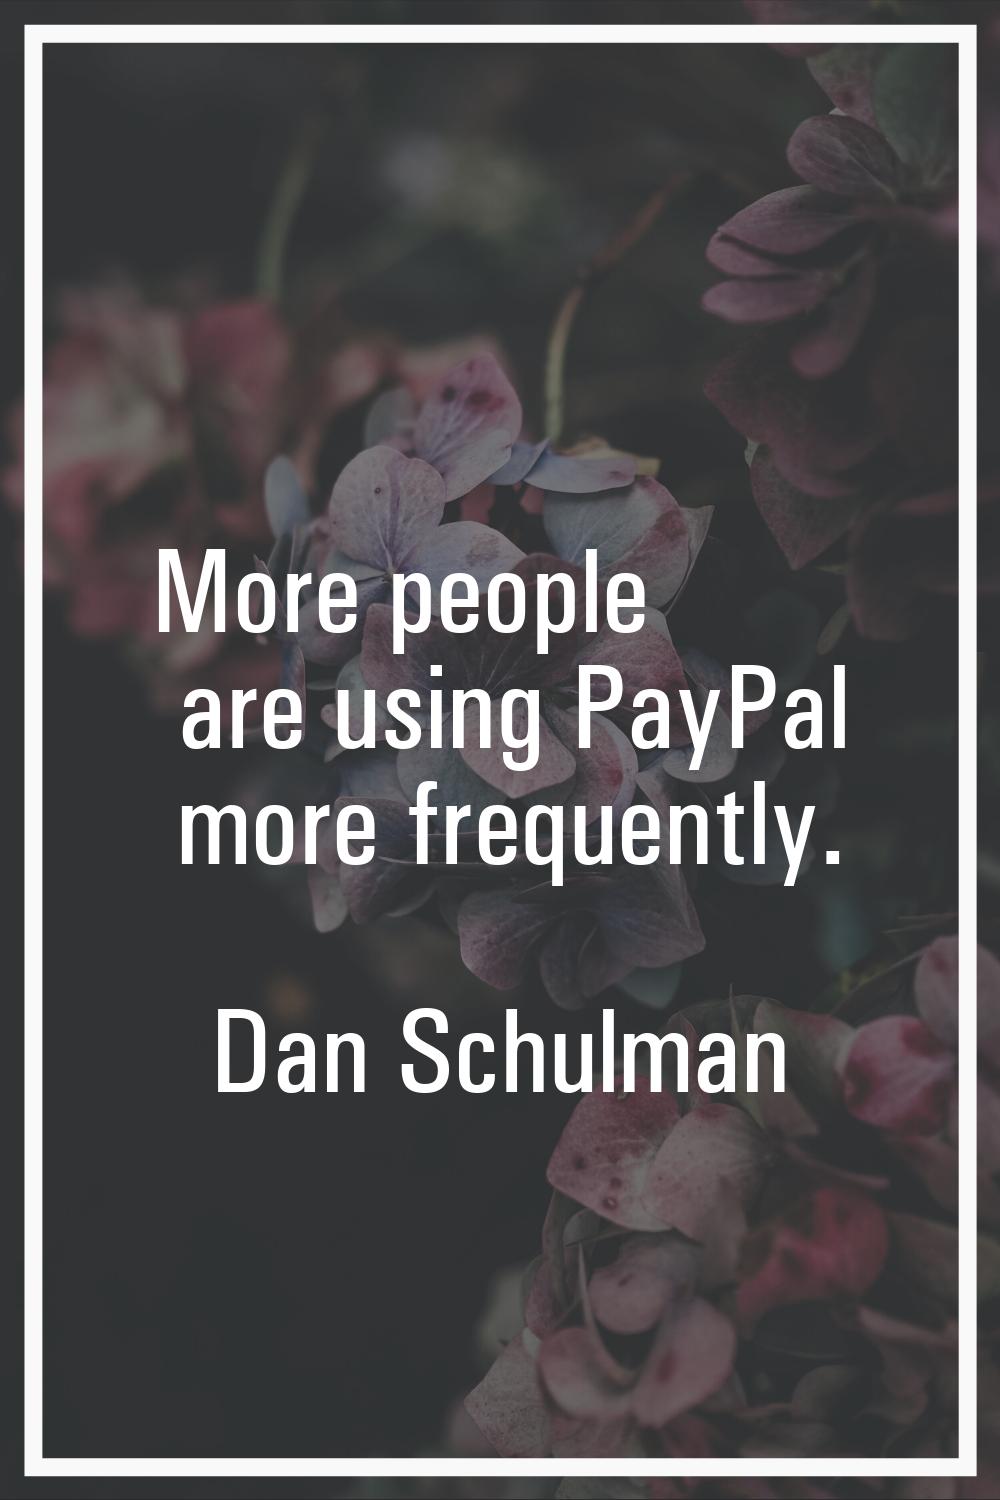 More people are using PayPal more frequently.